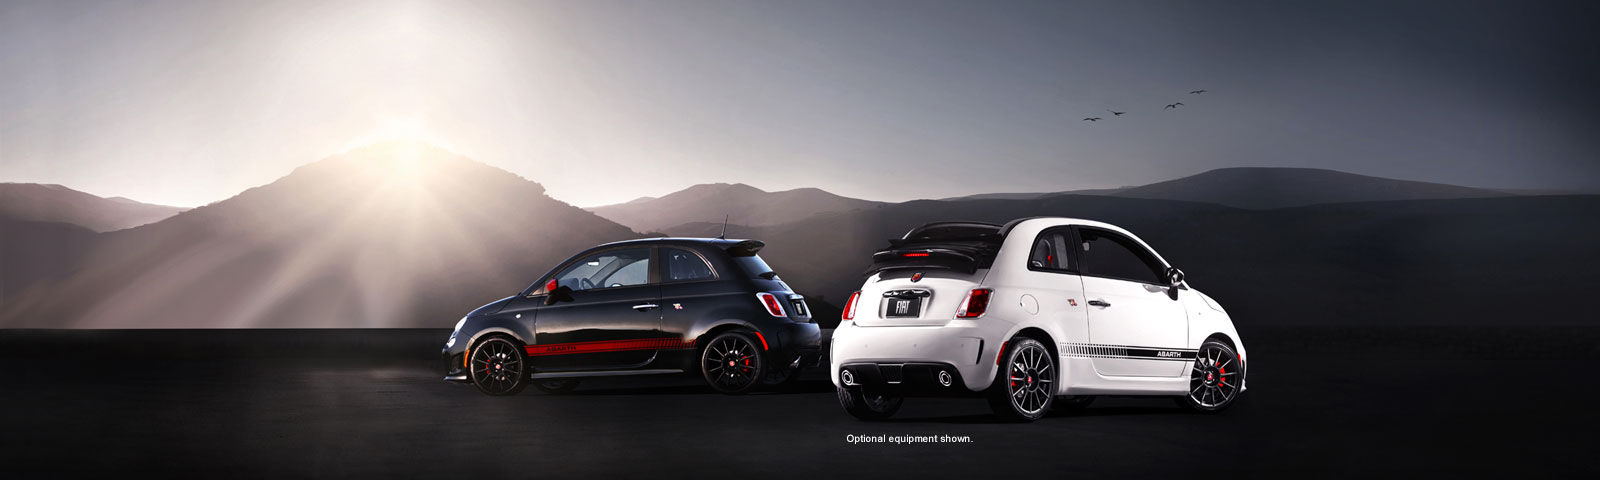 Nice Images Collection: Fiat Abarth Desktop Wallpapers